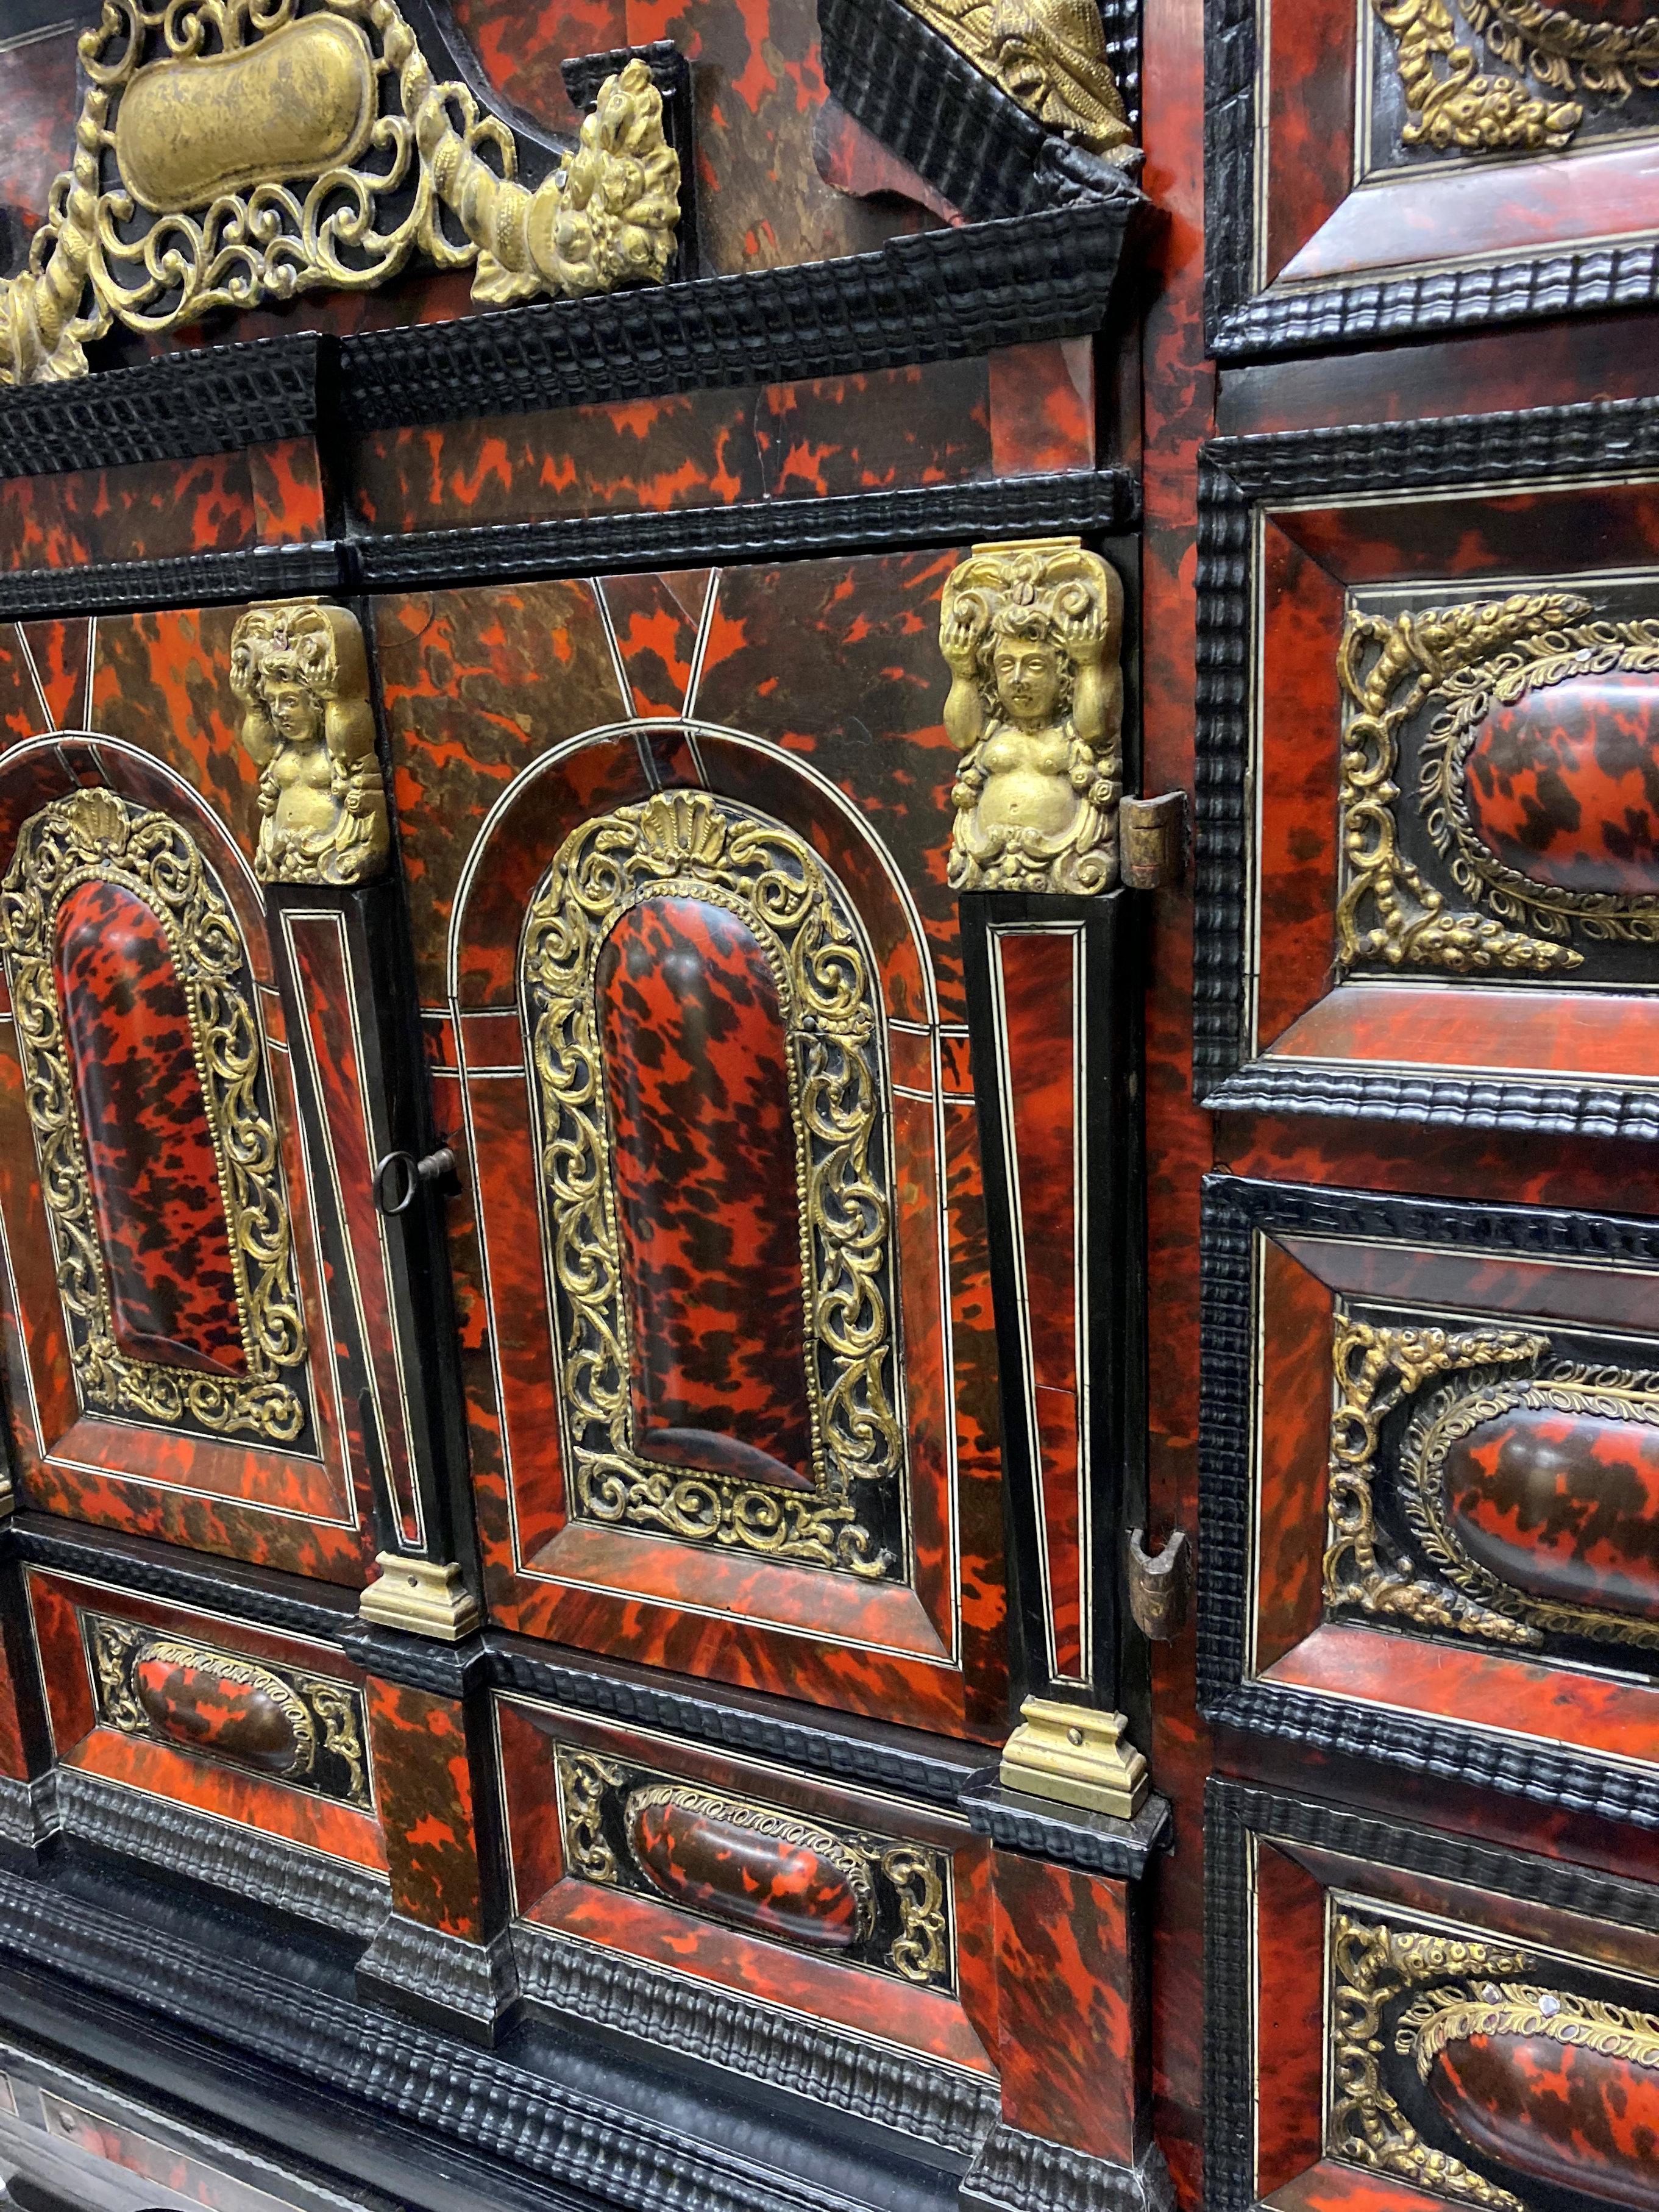 A rare and of fine quality, late XVII Century Flemish European ormolu mounted ebony and red tortoiseshell cabinet on stand, of architectural form, crowned with an architectural, galleried pediment. Below: two central finely decorated doors opening